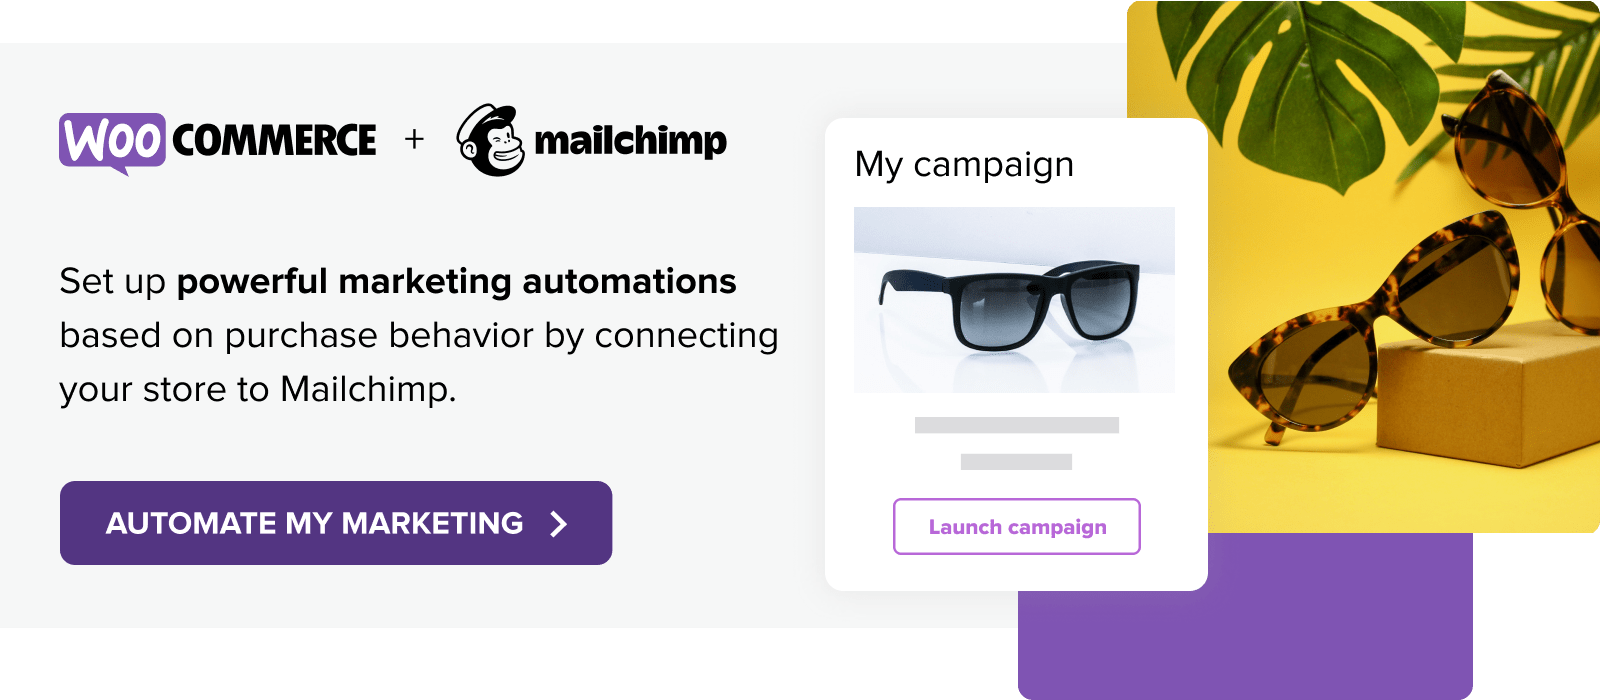 Set up powerful marketing automations with Mailchimp